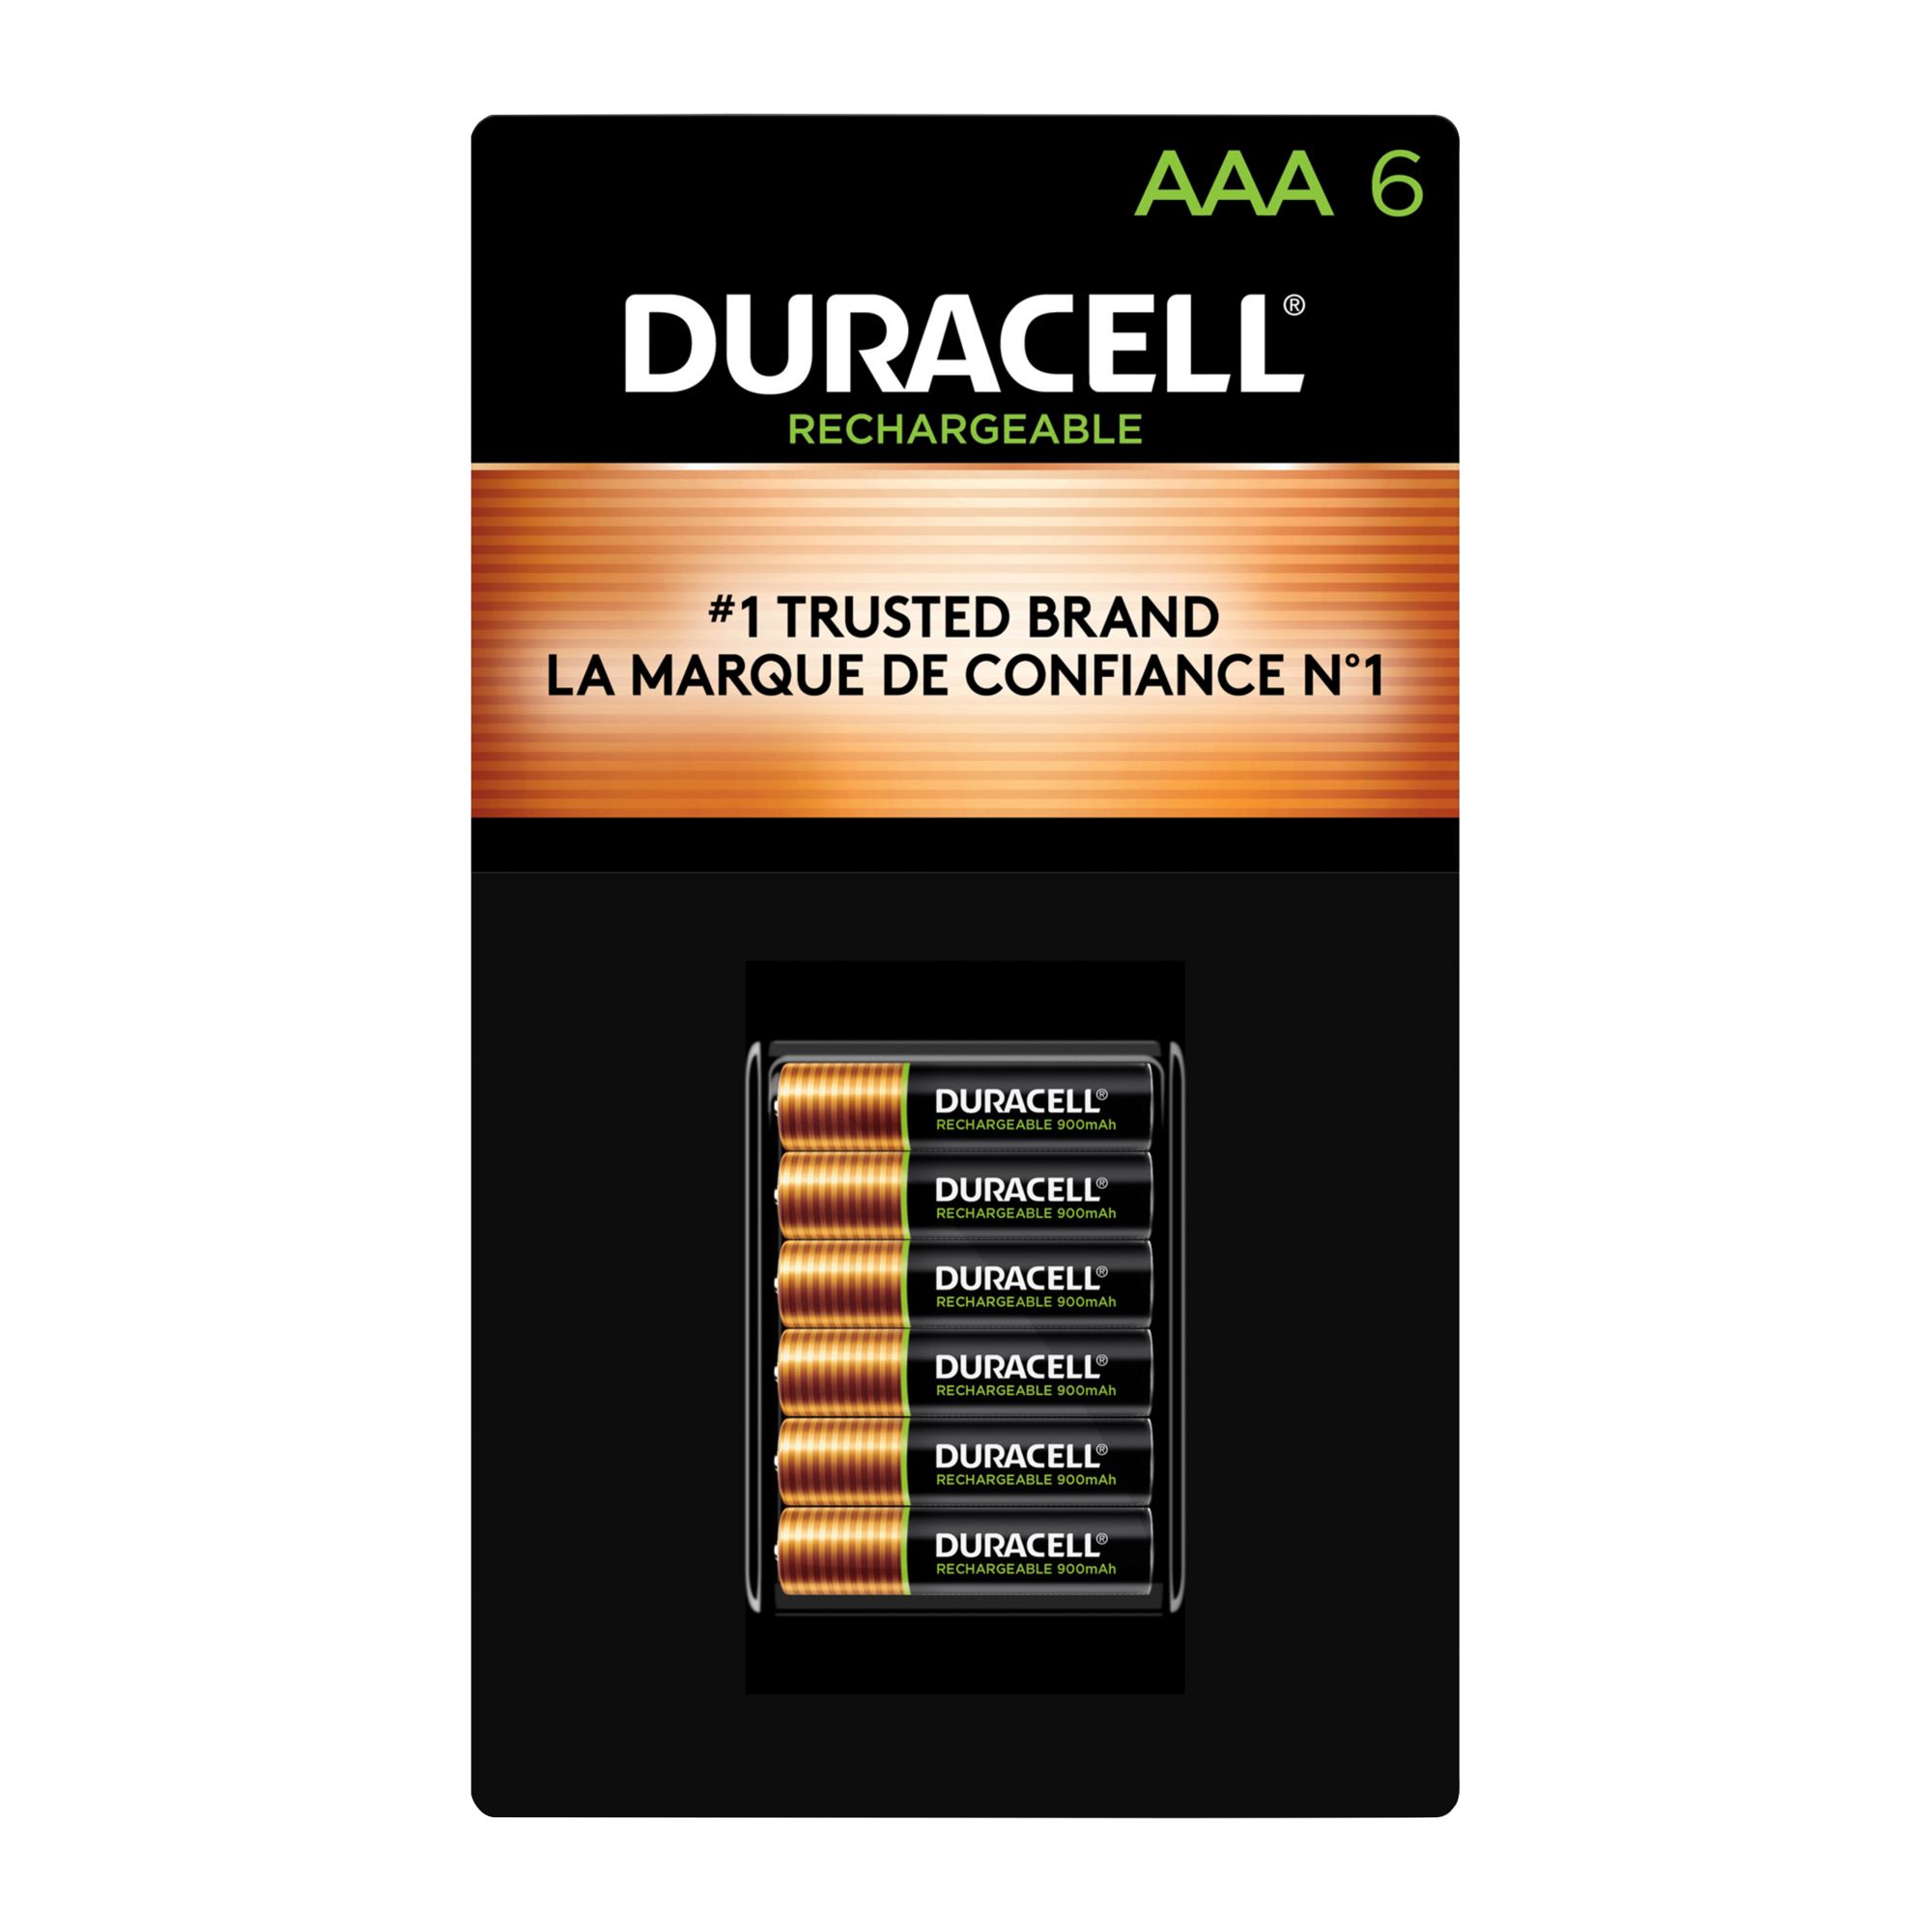 Duracell Rechargeable AAA Pre-Charged Batteries, 6 ct.